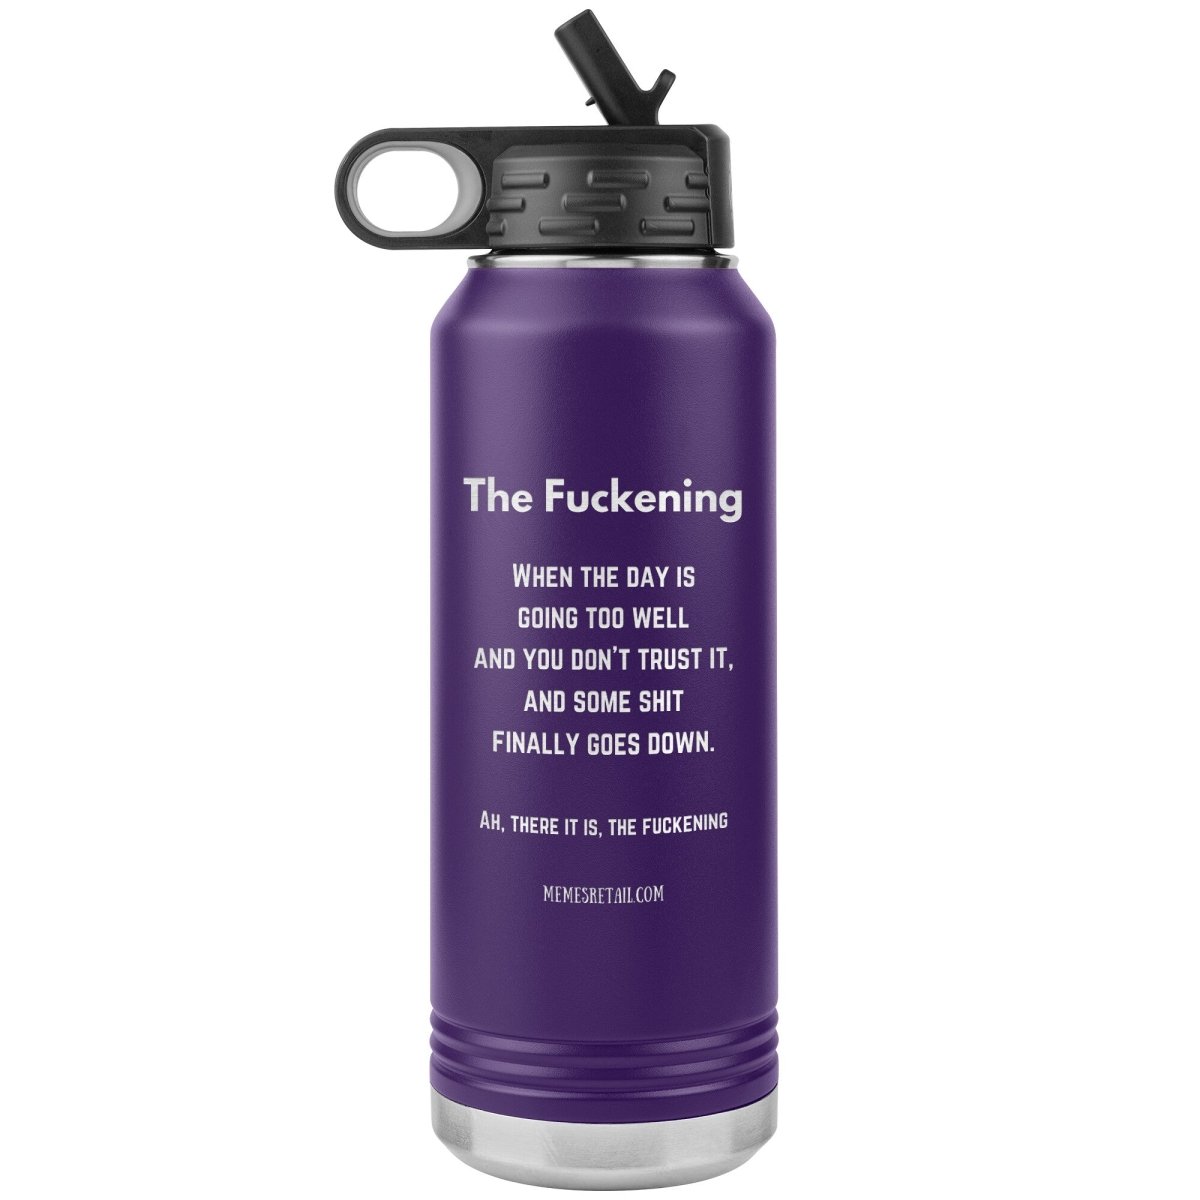 The Fuckening, When you don't trust the day. 32 oz Water Bottle, Purple - MemesRetail.com